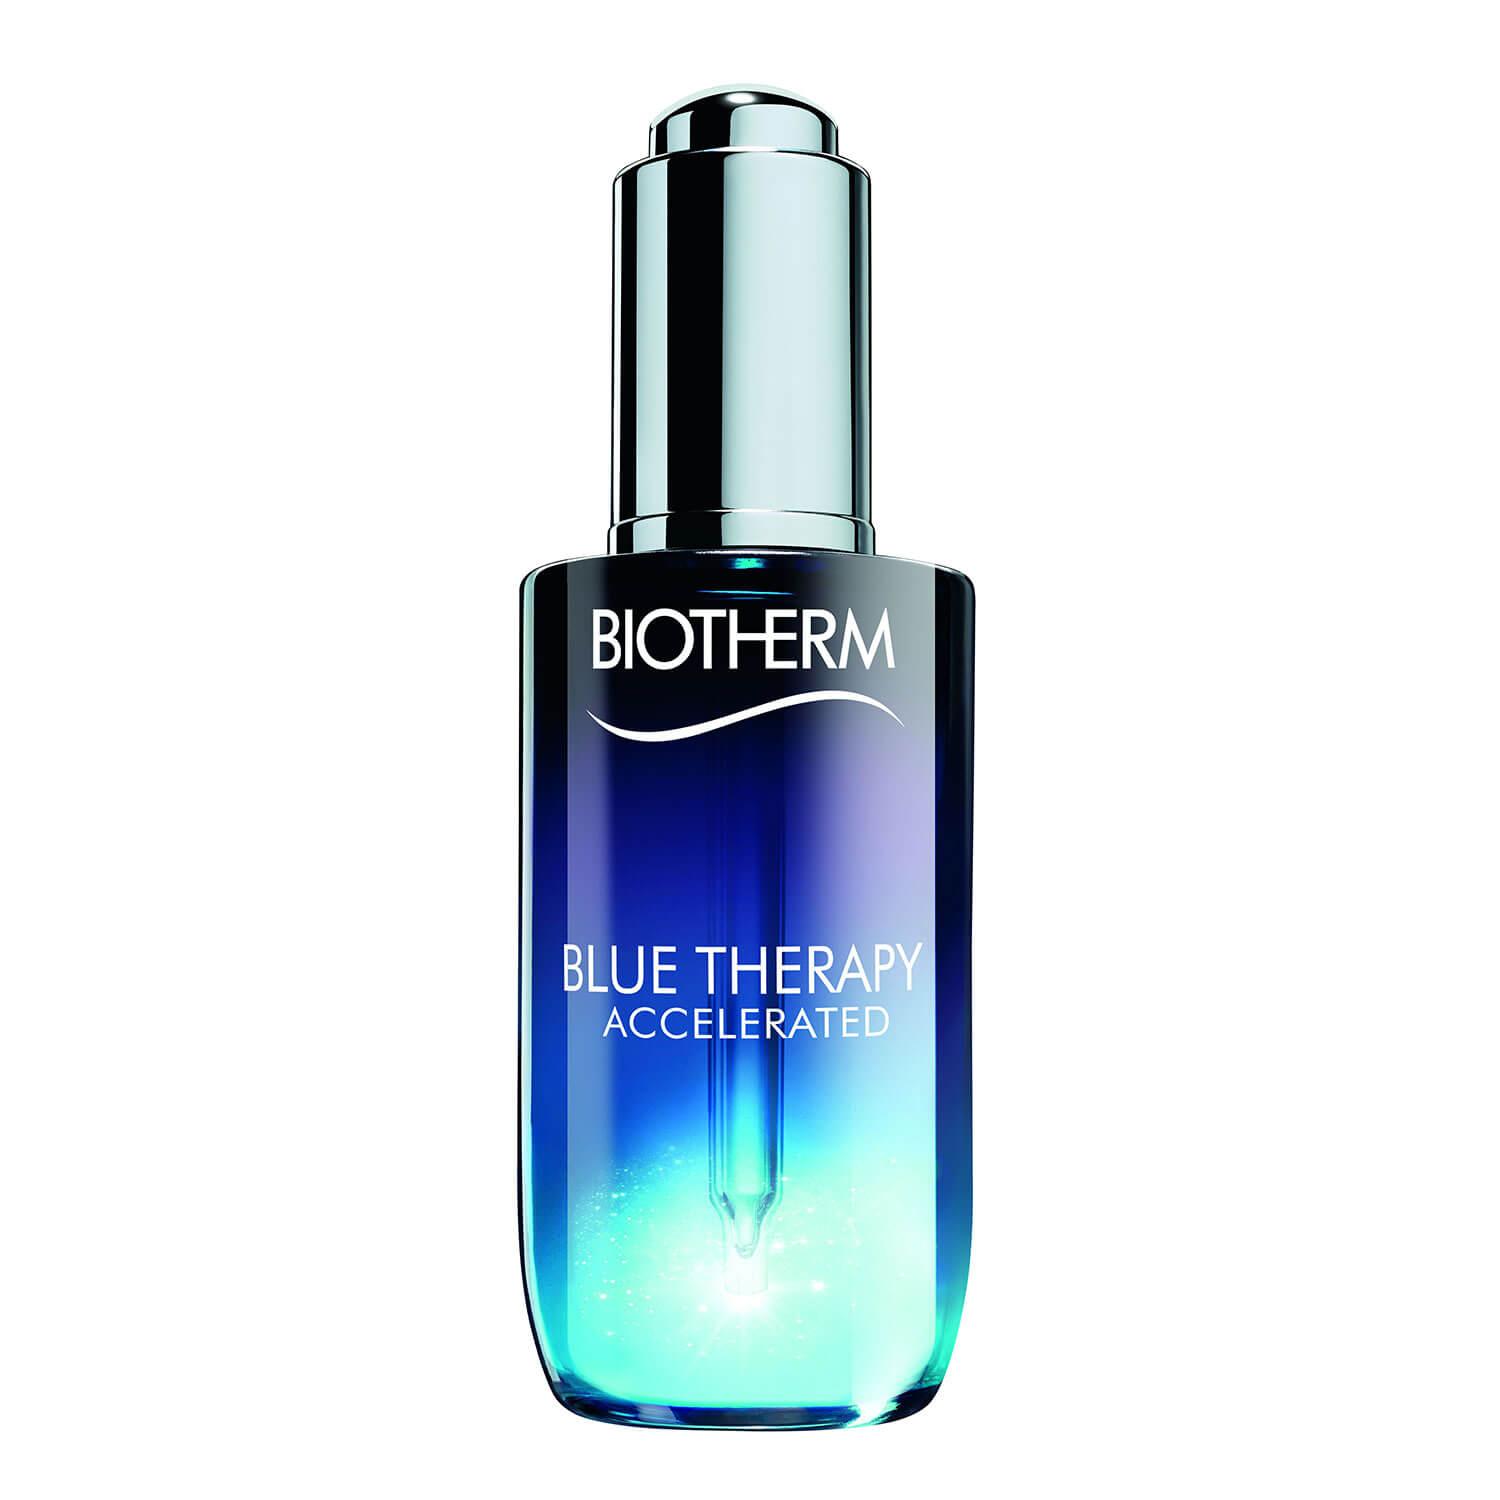 Blue Therapy - Accelerated Serum